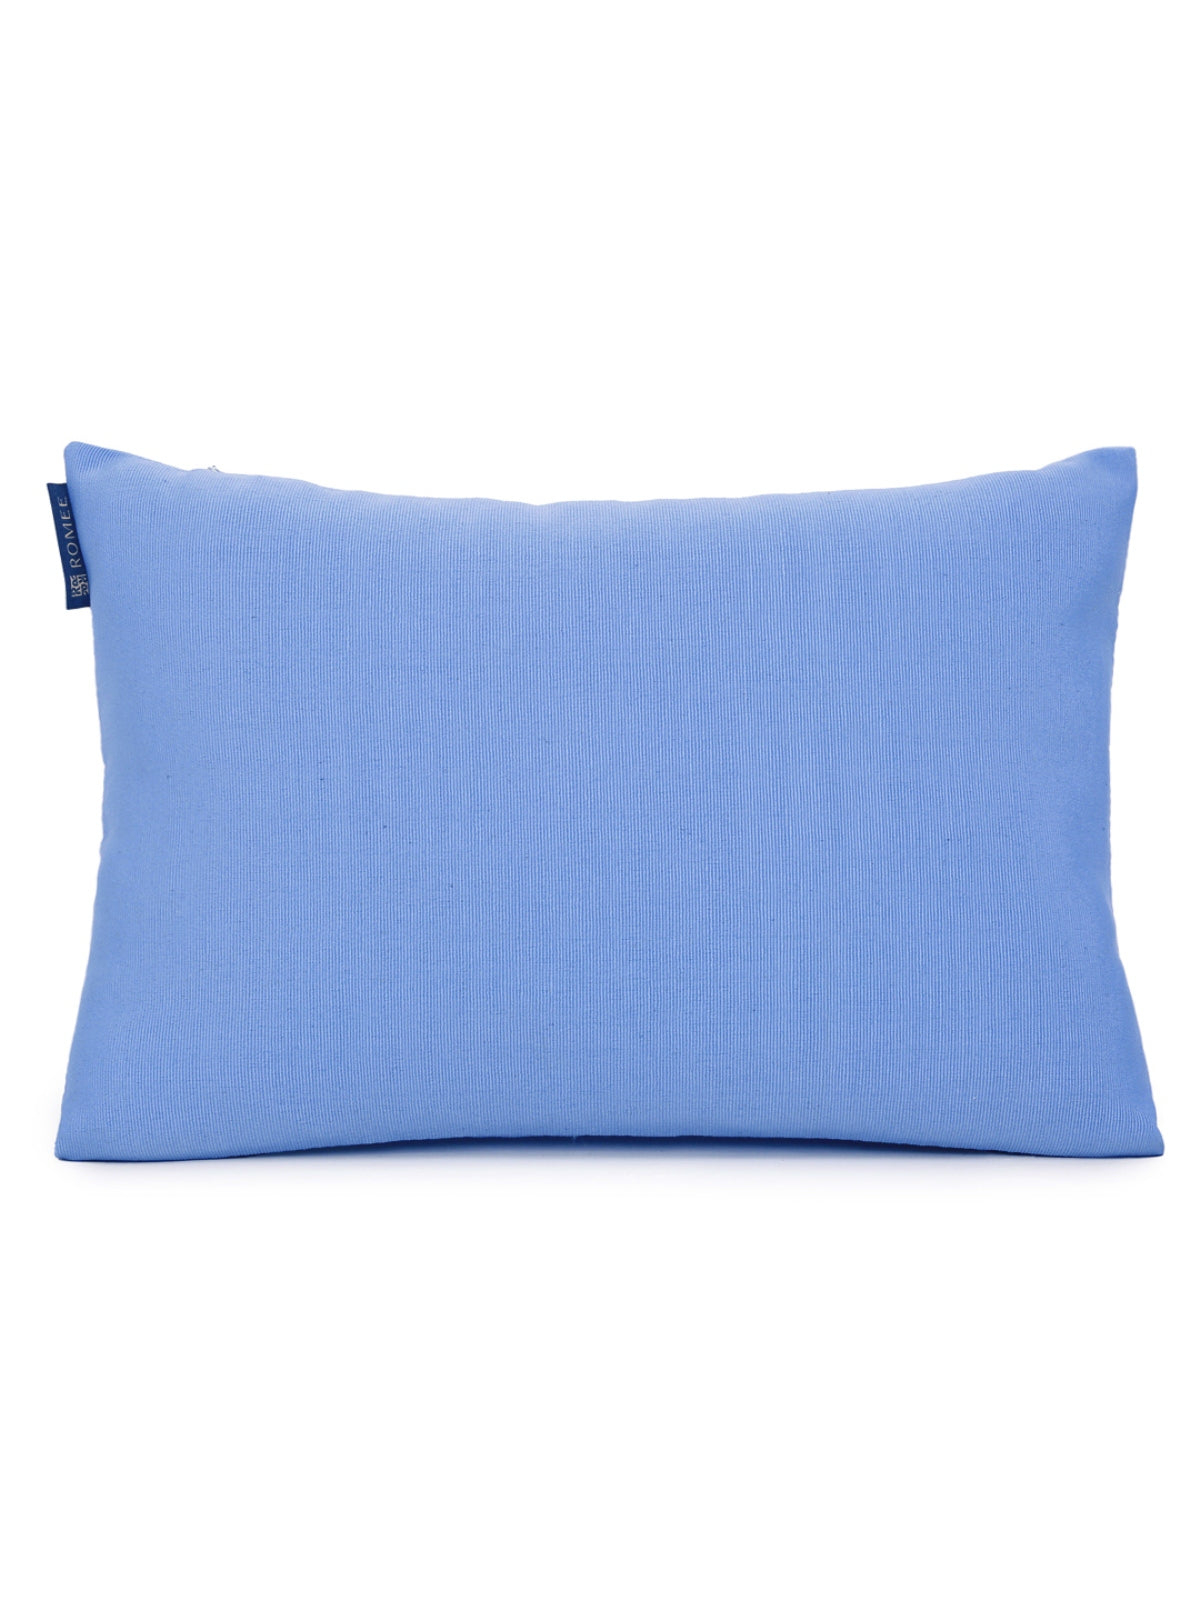 ROMEE Blue Solid Printed Cushion Covers Set of 2